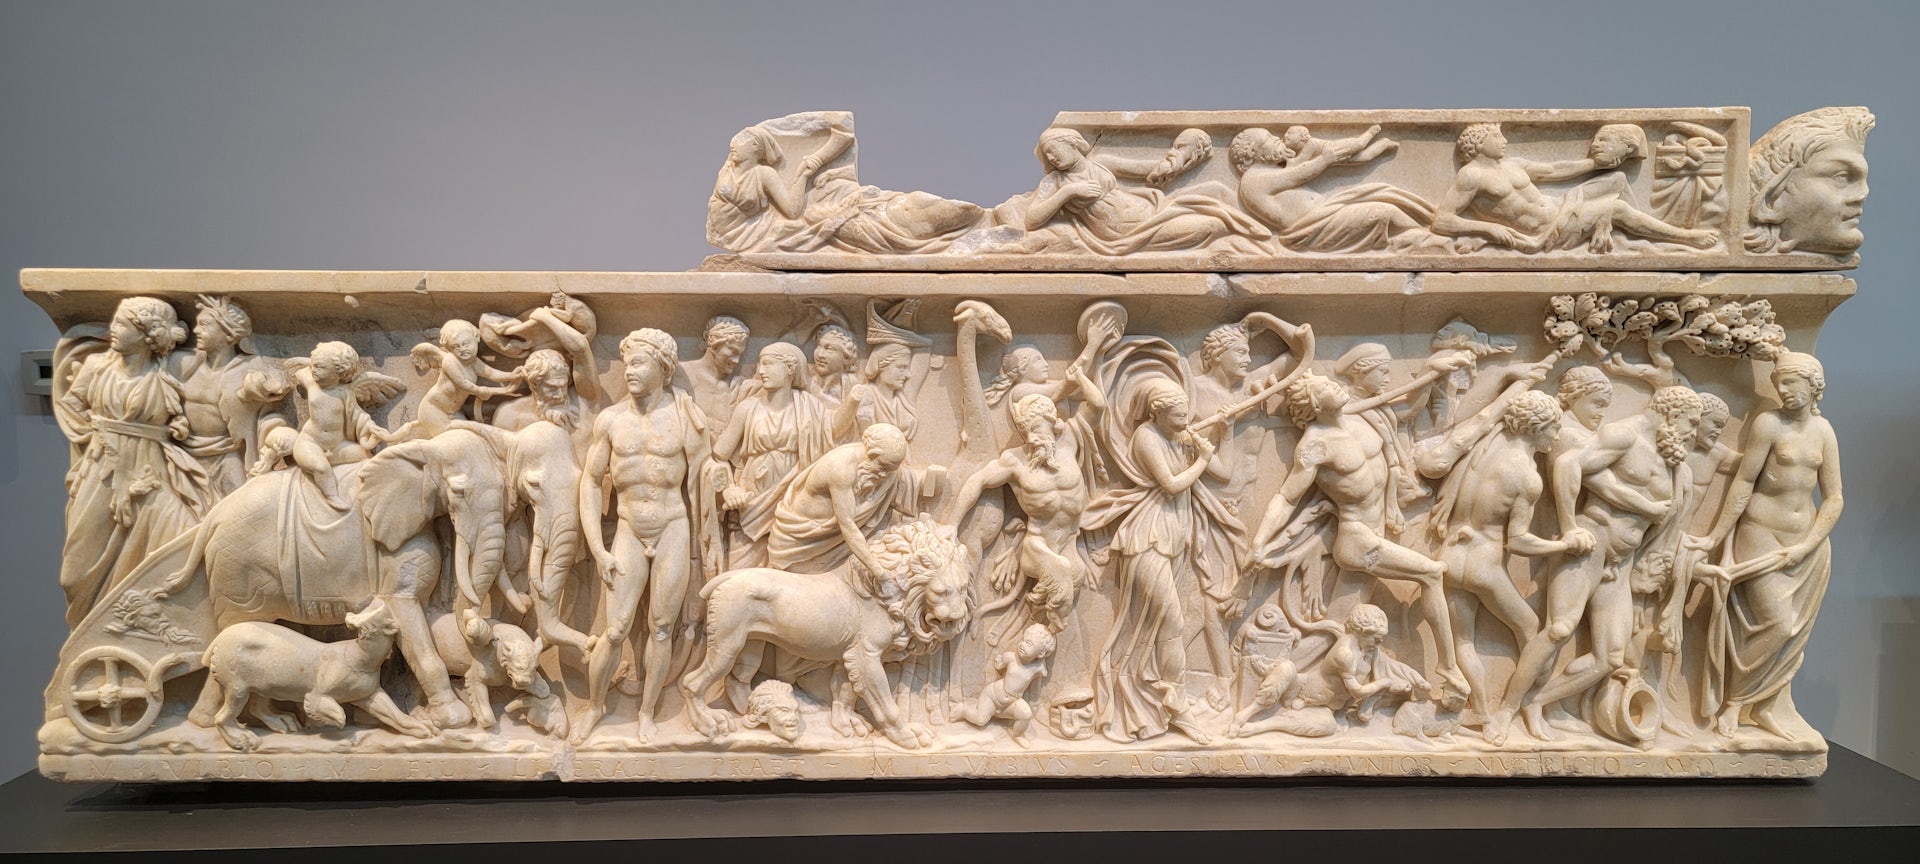 Marble sarcophagus of the triumph of Bacchus